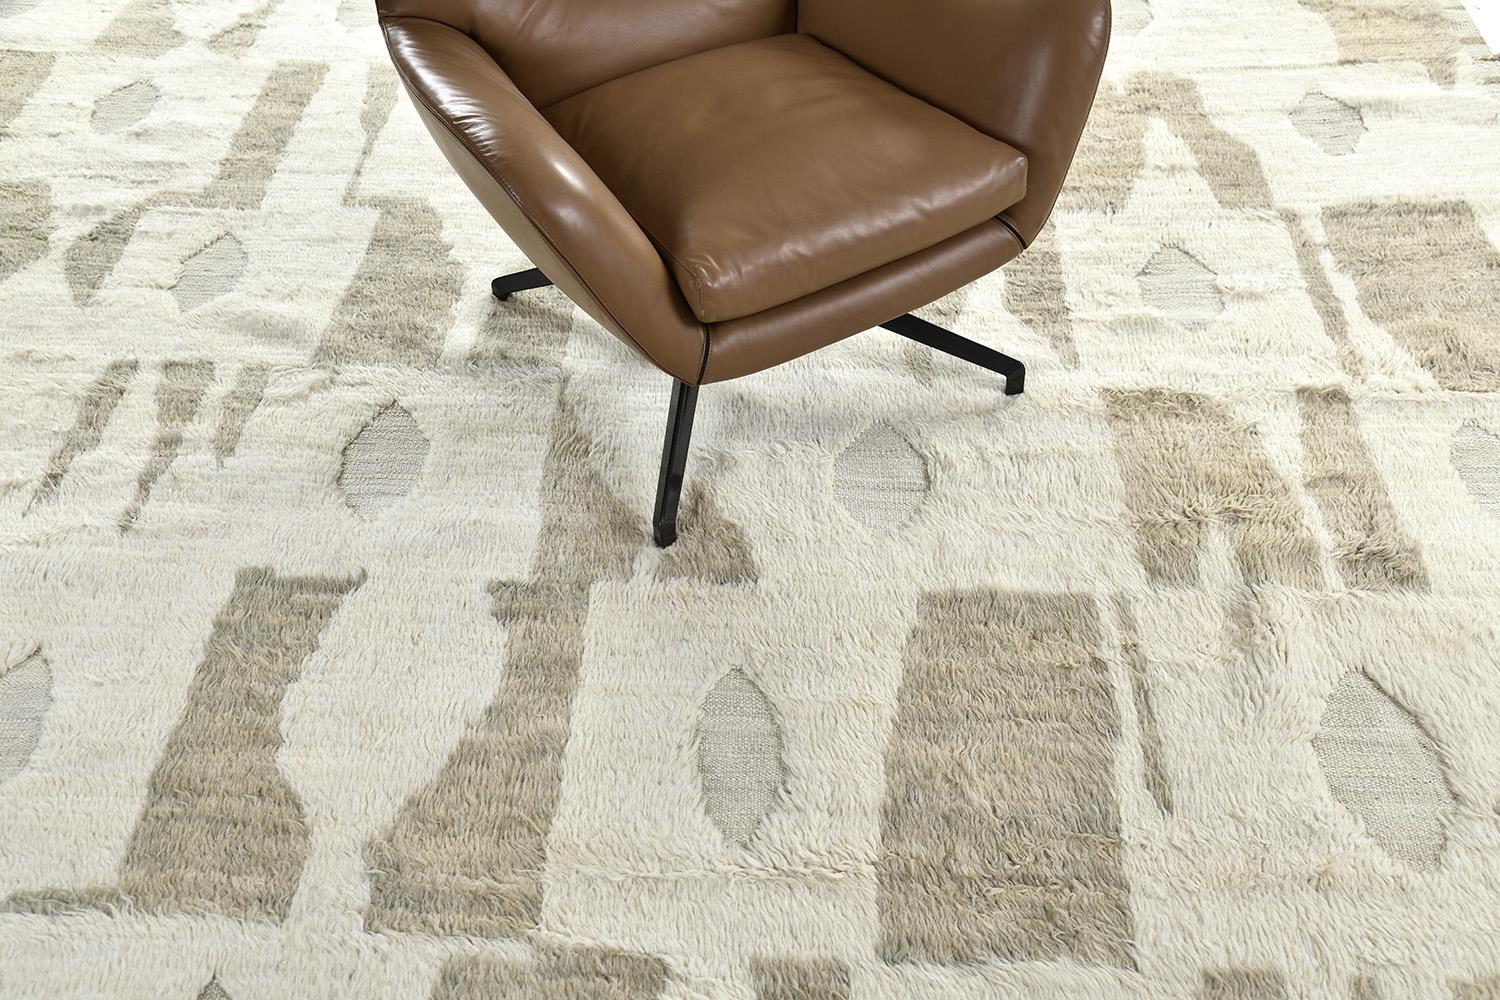 Fengfeng is made of luxurious wool and is made of timeless design elements. Its weaving of natural earth tones and unique embossed design is what makes the Haute Bohemian collection the signature collection of California. This rug, designed in Los